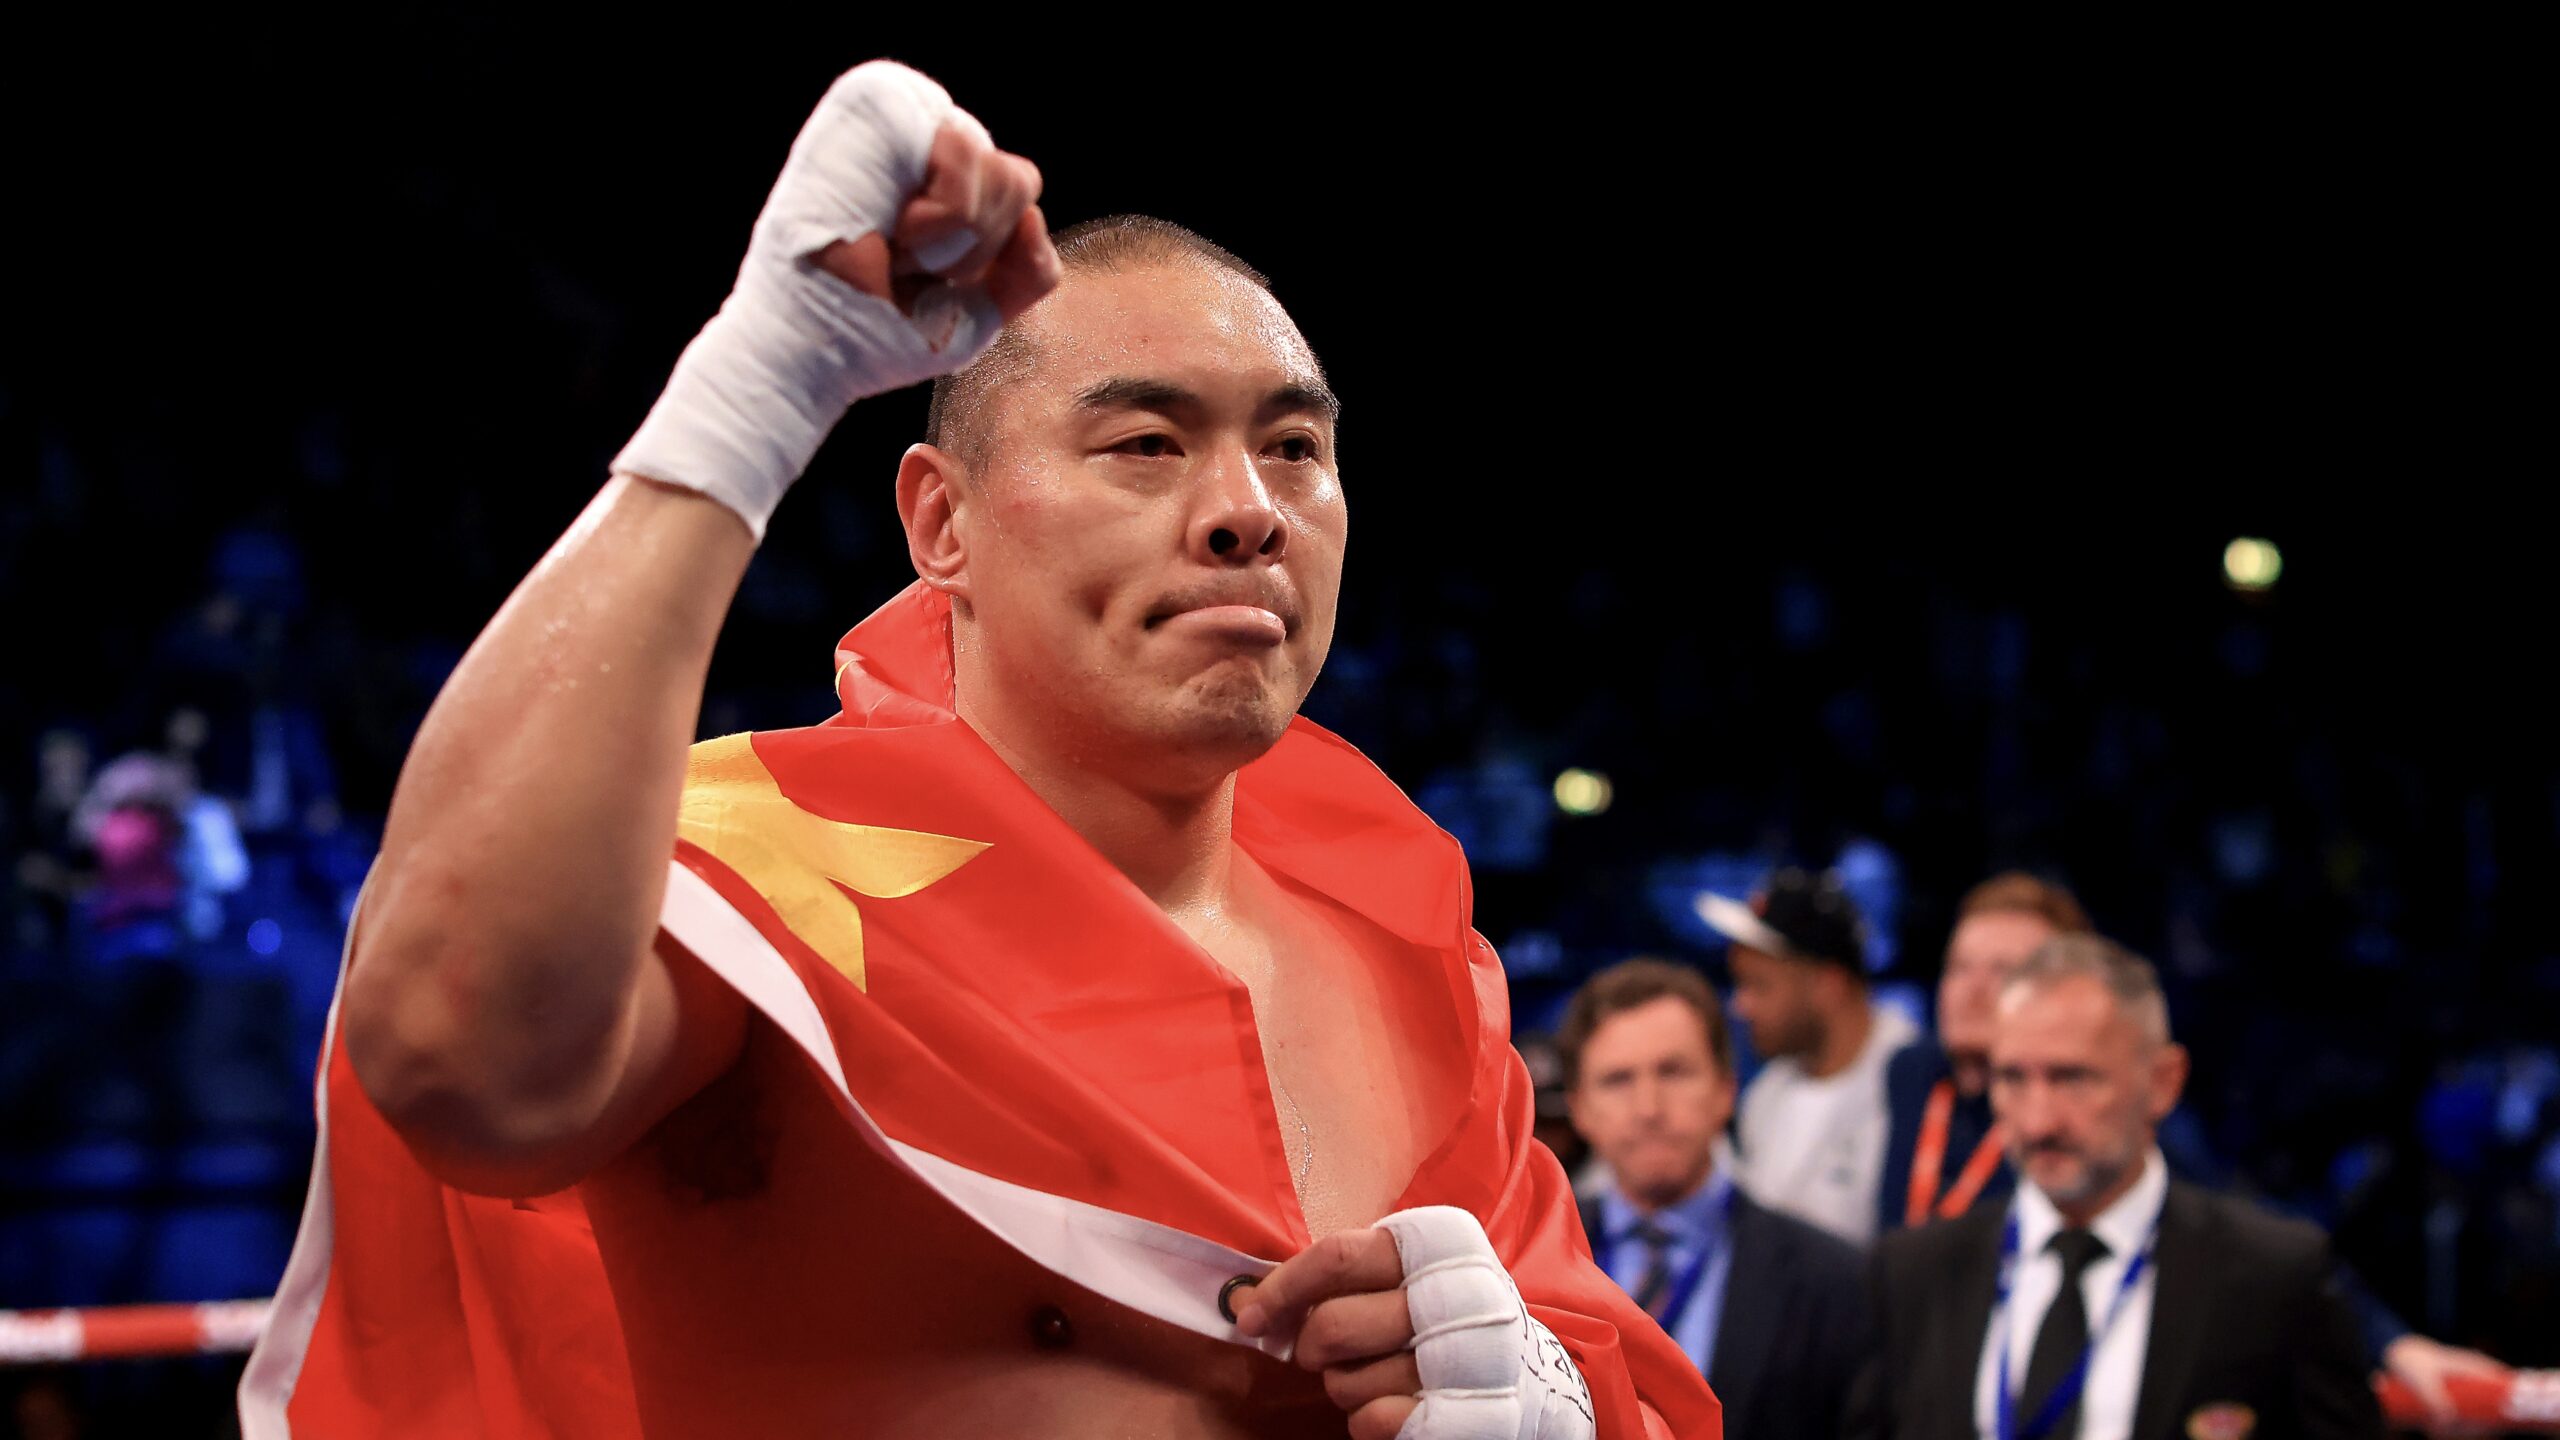 Zhilei Zhang: "Eddie Hearn will not let Anthony Joshua fight me, it's too much of a risk"